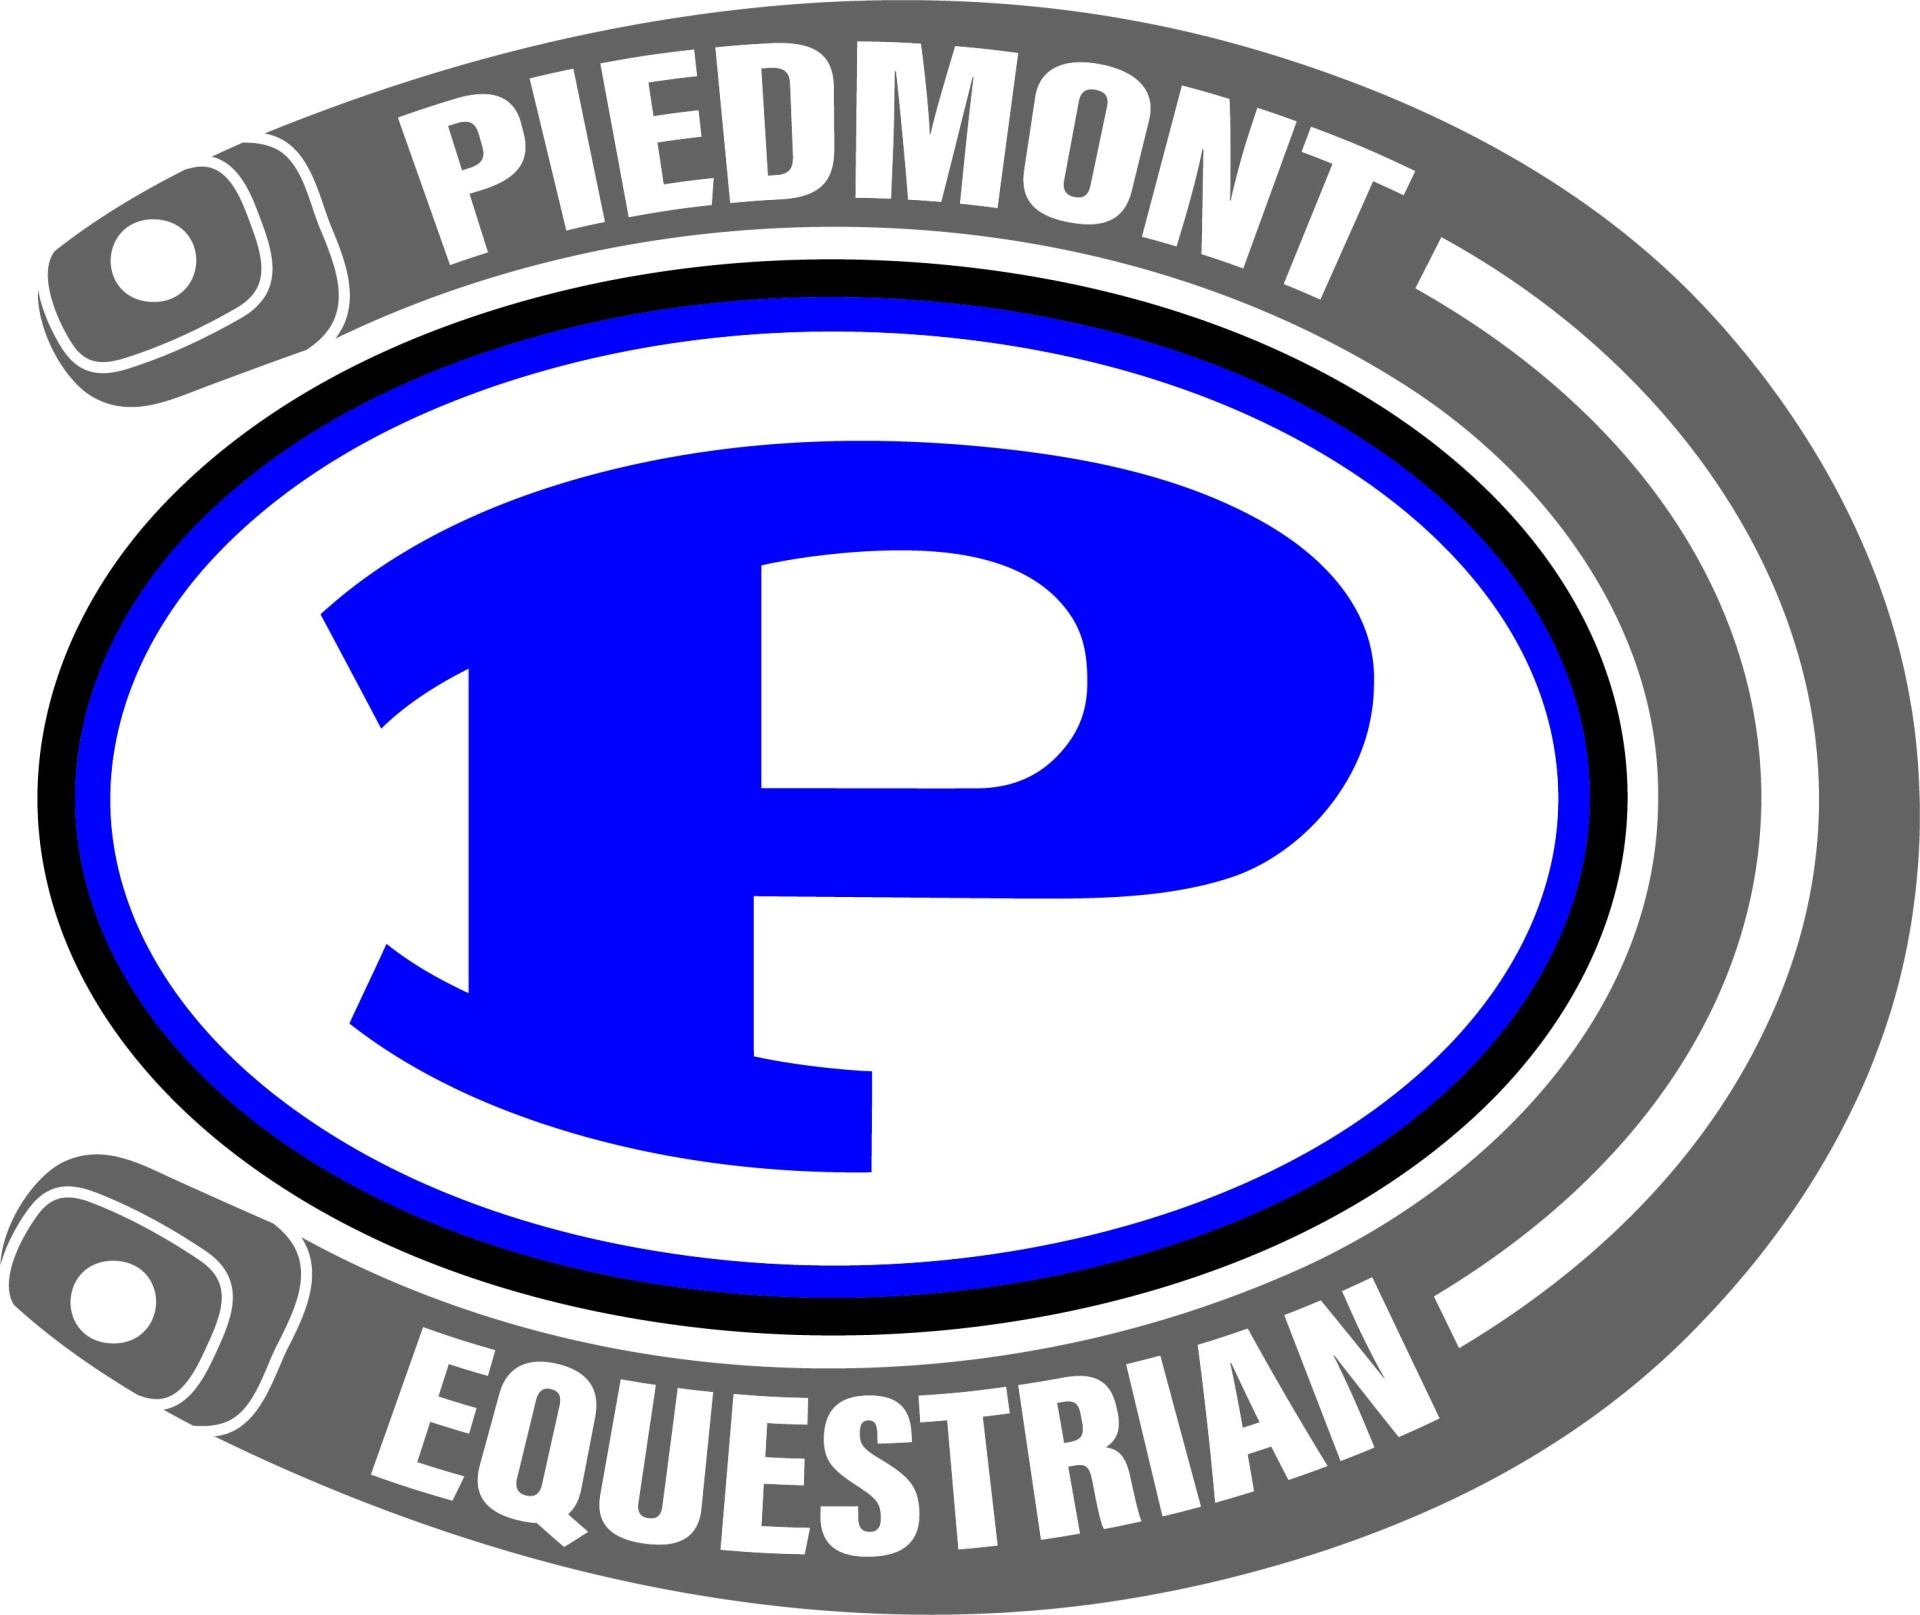 a logo for piedmont equestrian with a blue letter p